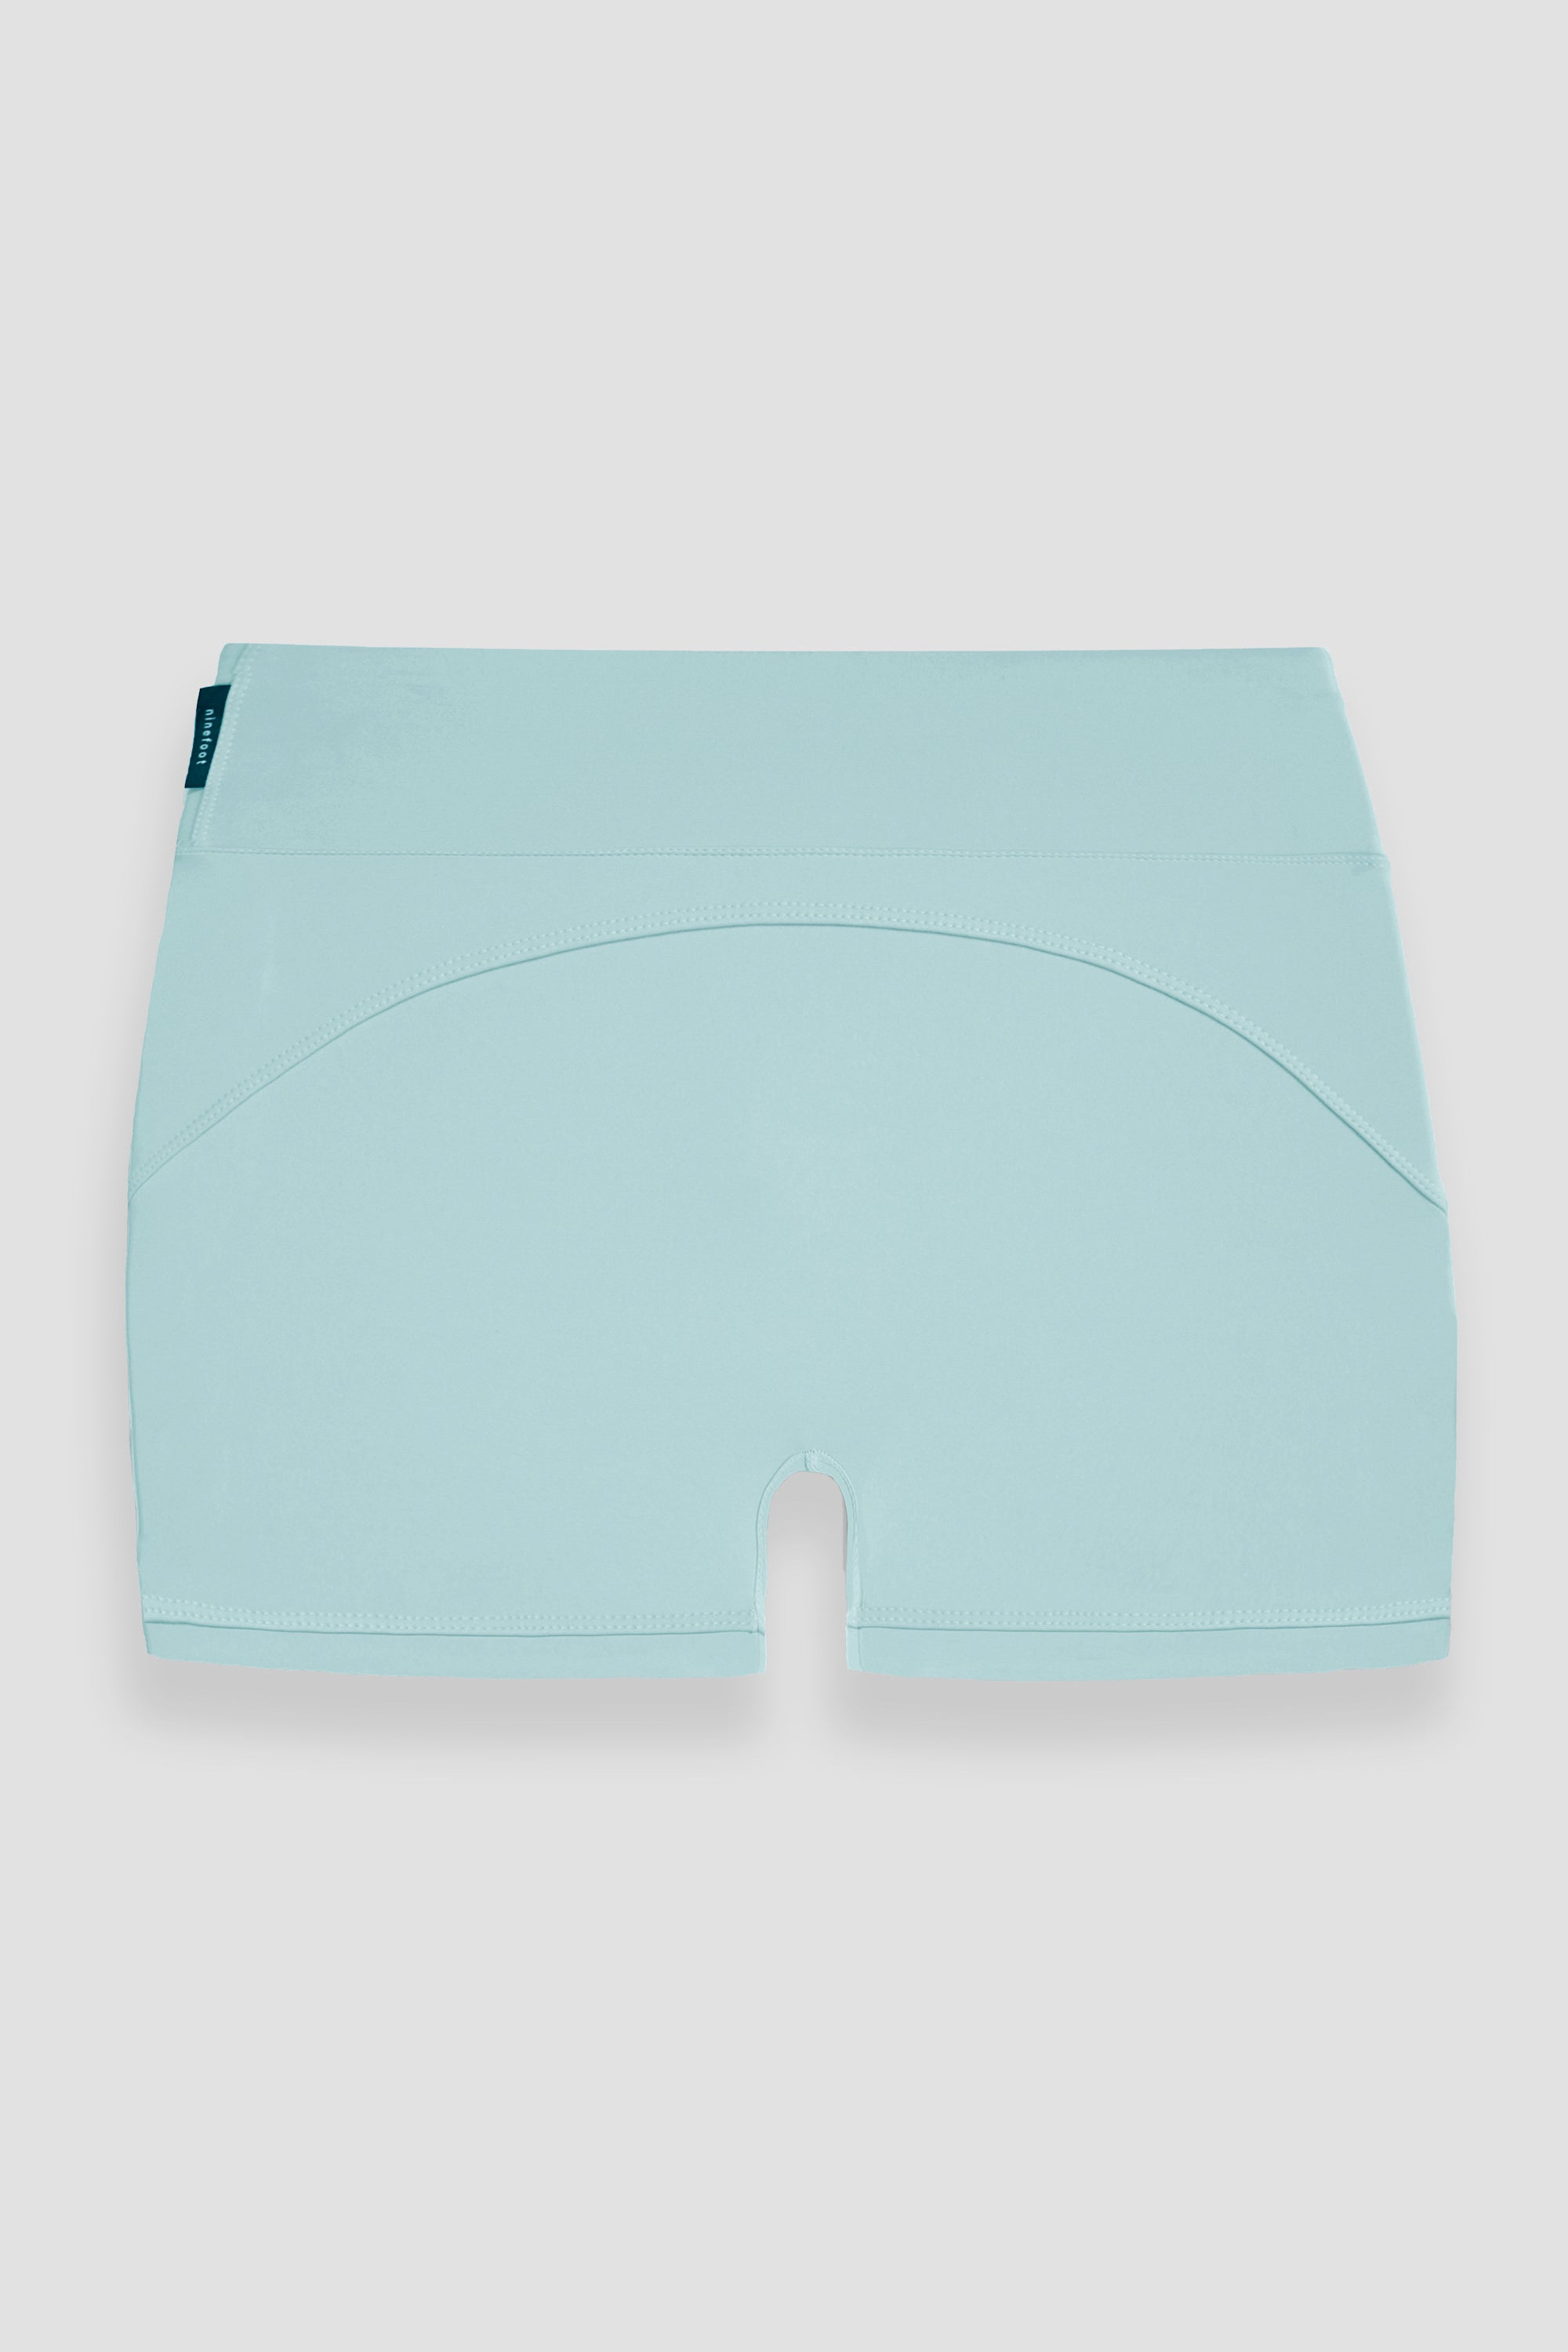 gerupuk yoga and surf shorts in mint color flat photo front side